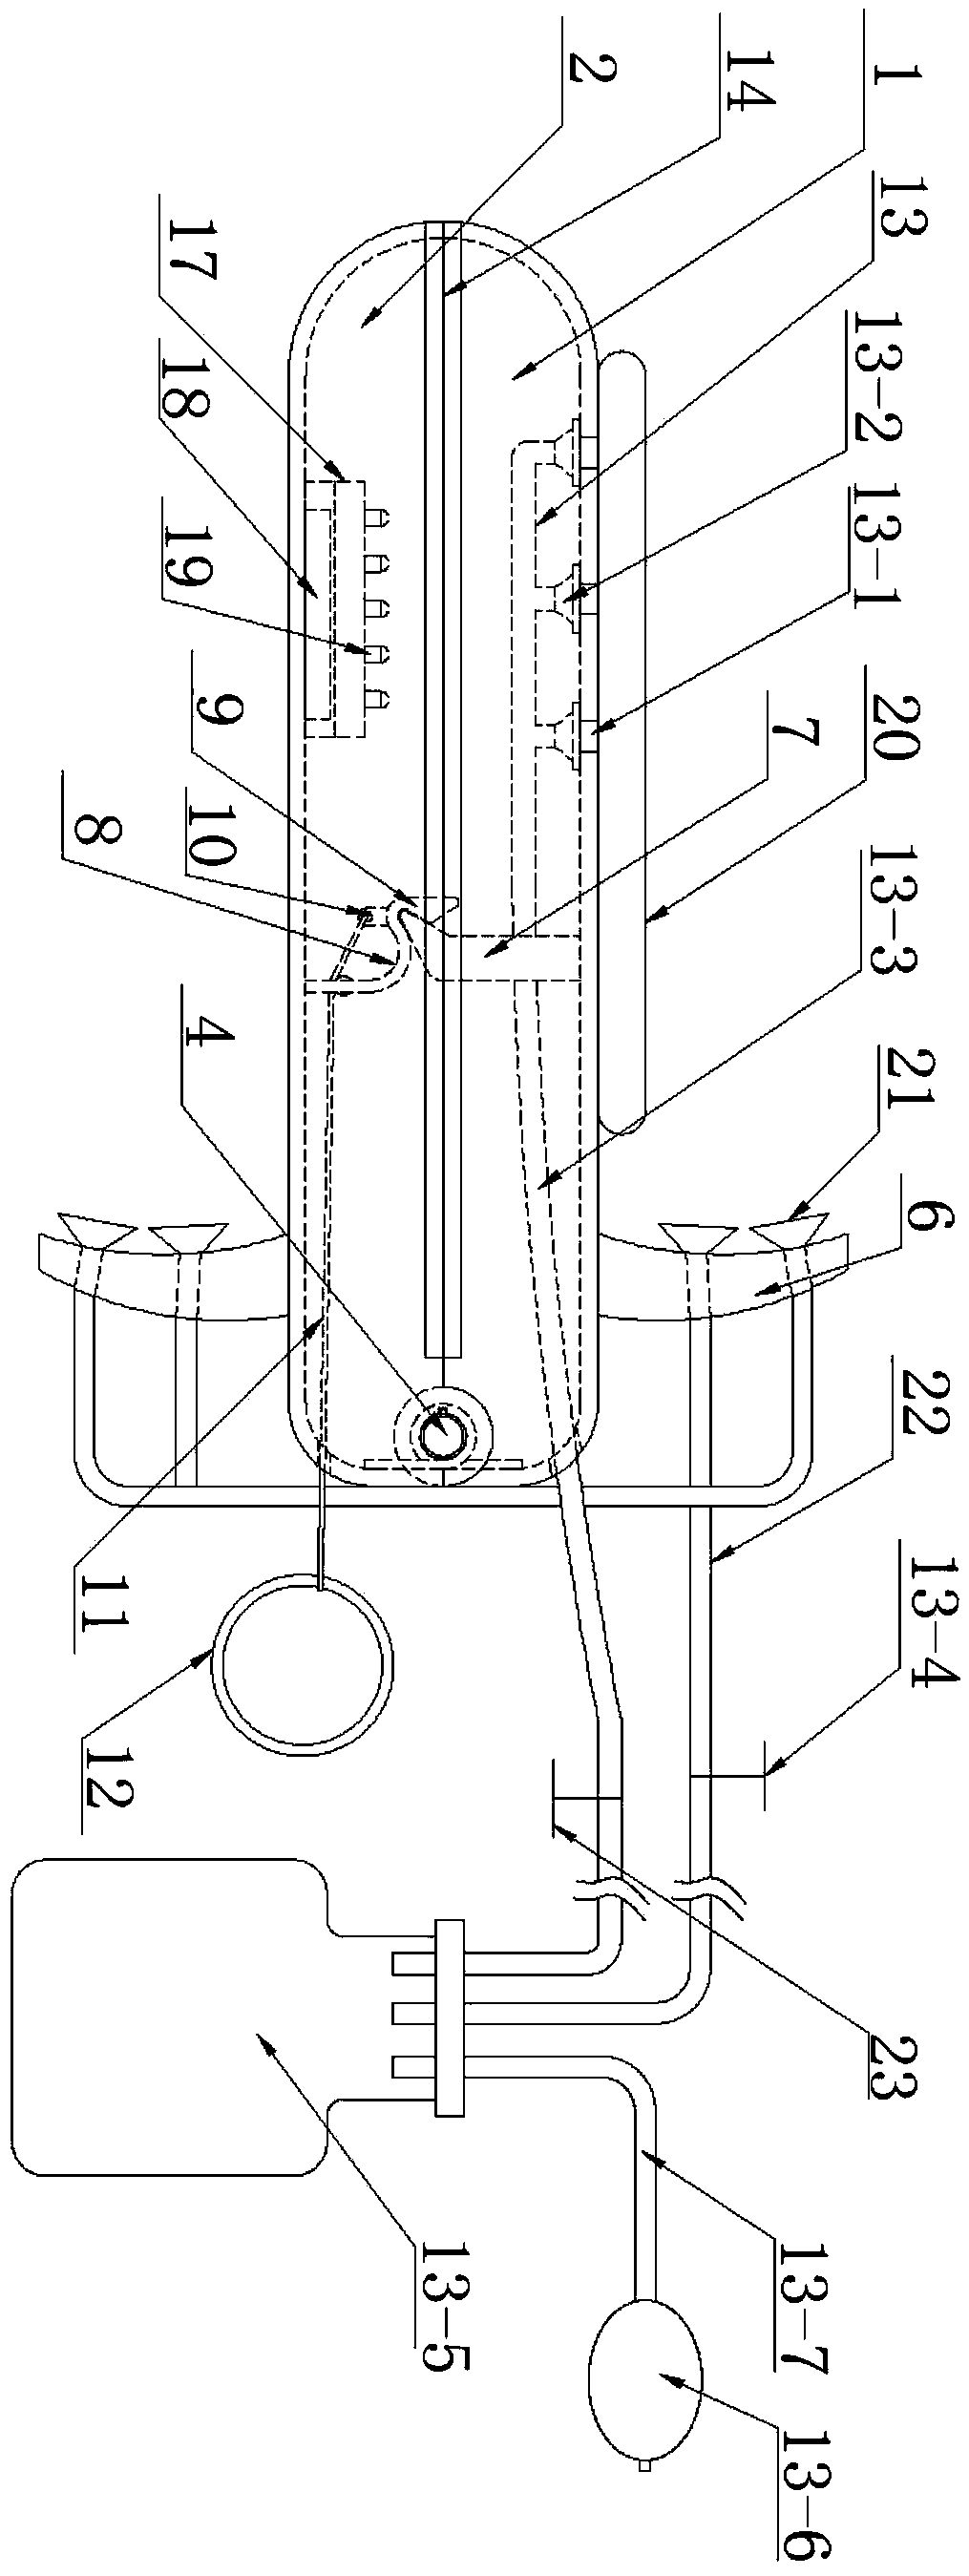 Strutting device with high safety performance for gynecological examination